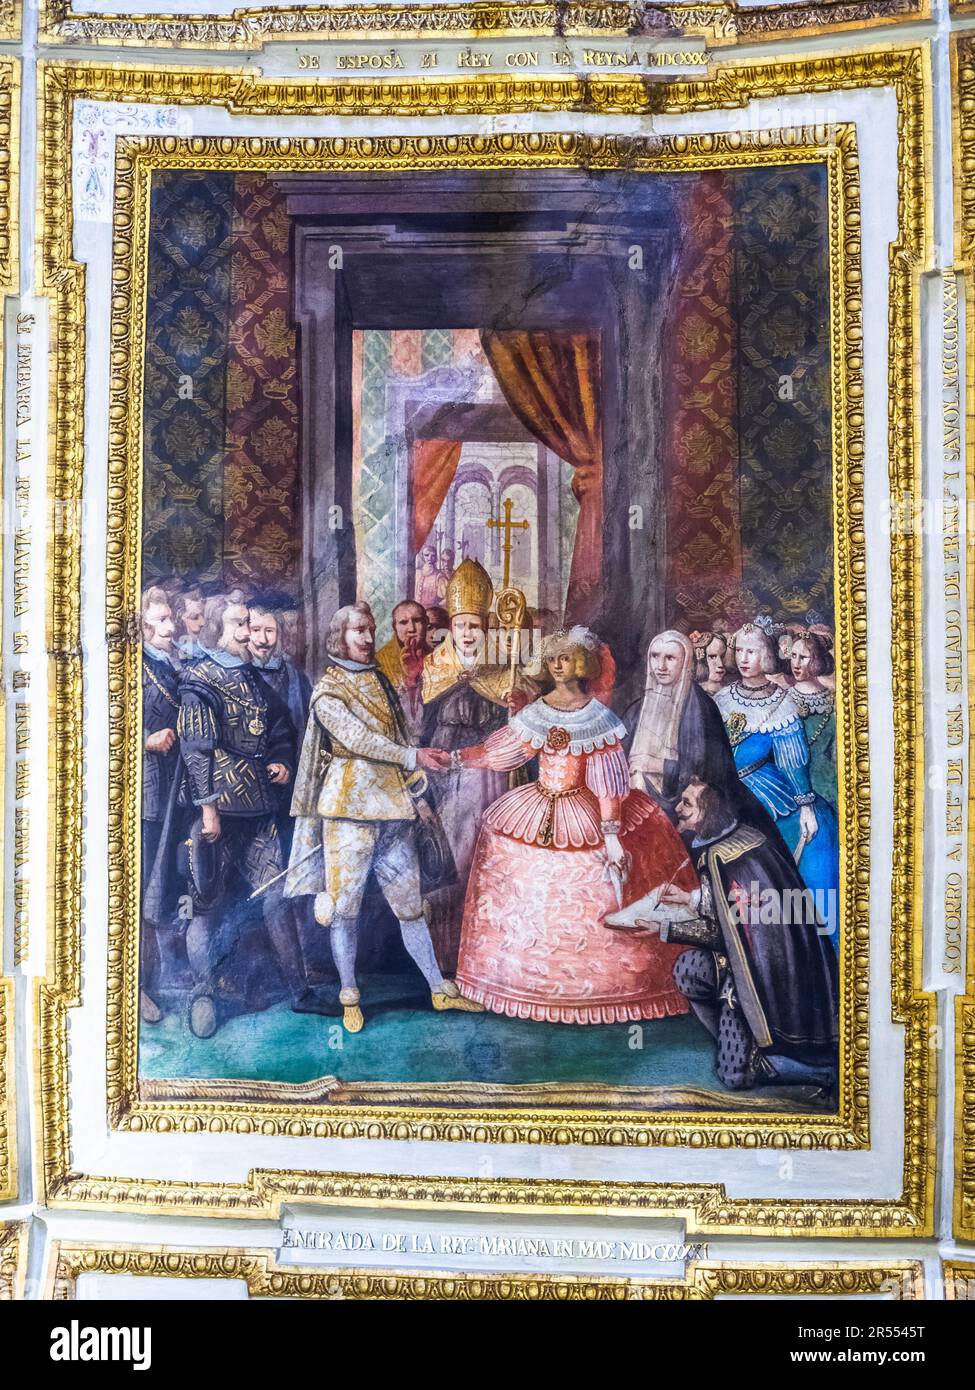 Painted ceiling framed by gilded stucco mouldings and inscriptions depicting the Wedding of Marianne to Philip III of Spain - The ambassador's Hall in the Royal Palace of Naples that In 1734 became the royal residence of the Bourbons - Naples, Italy Stock Photo